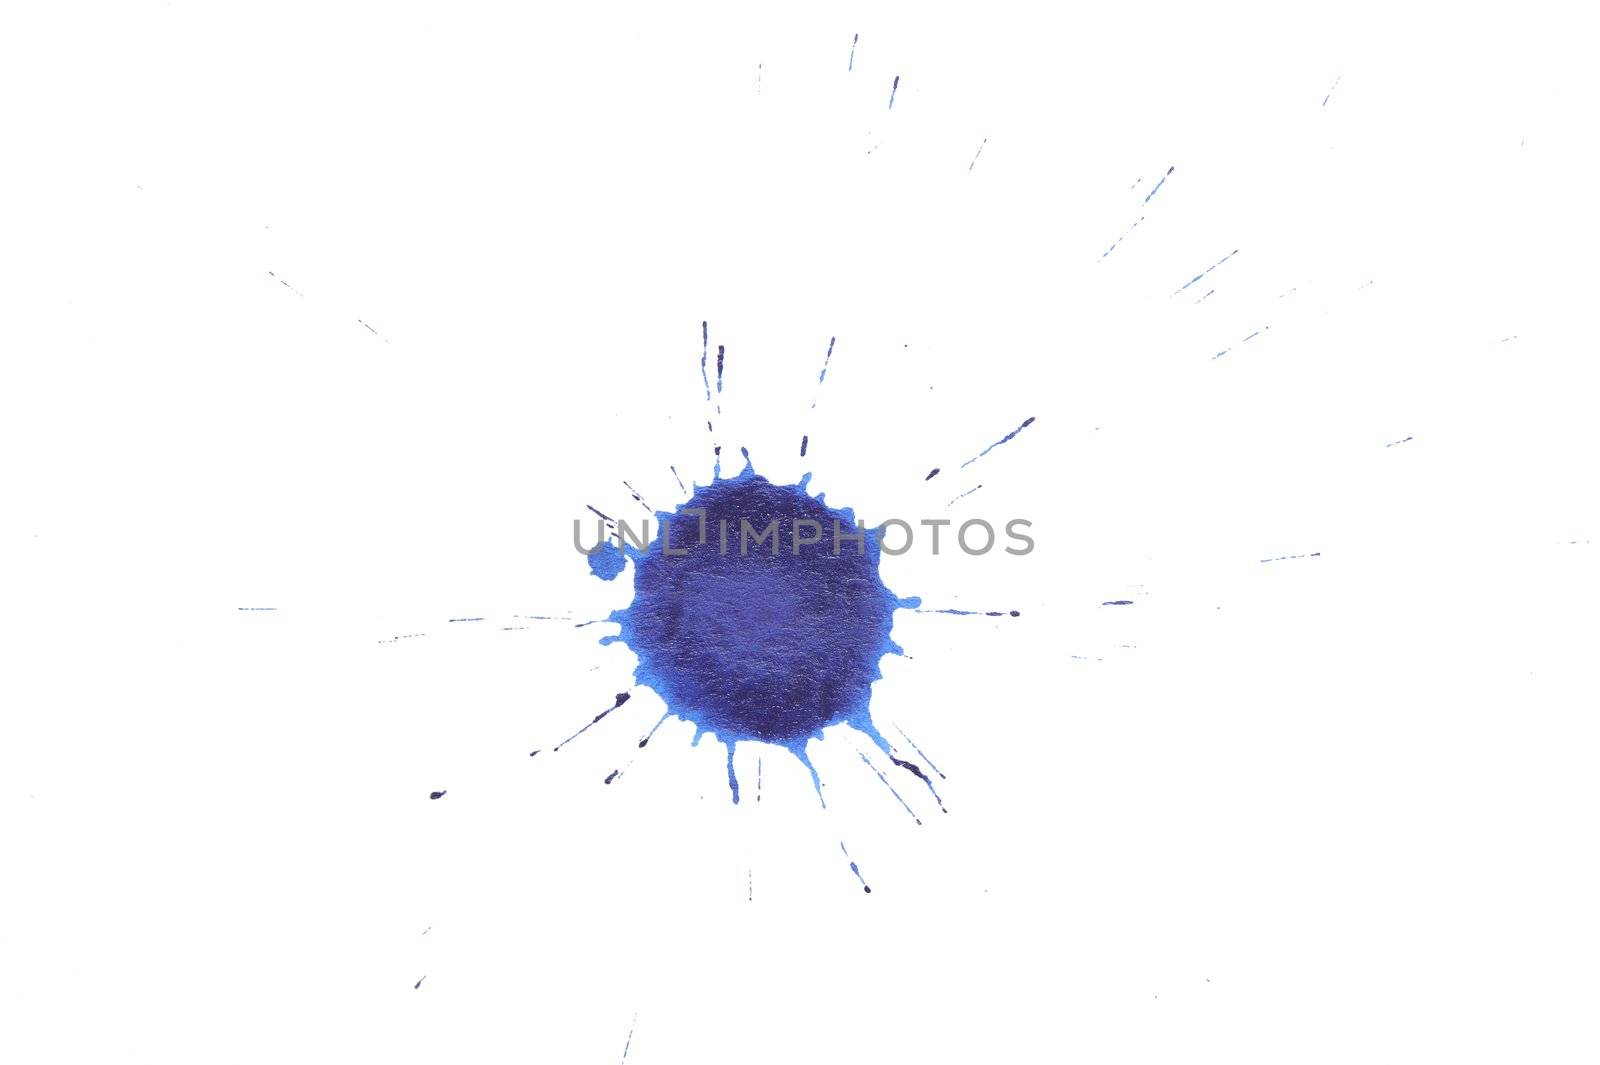 An image of blue spots on white paper